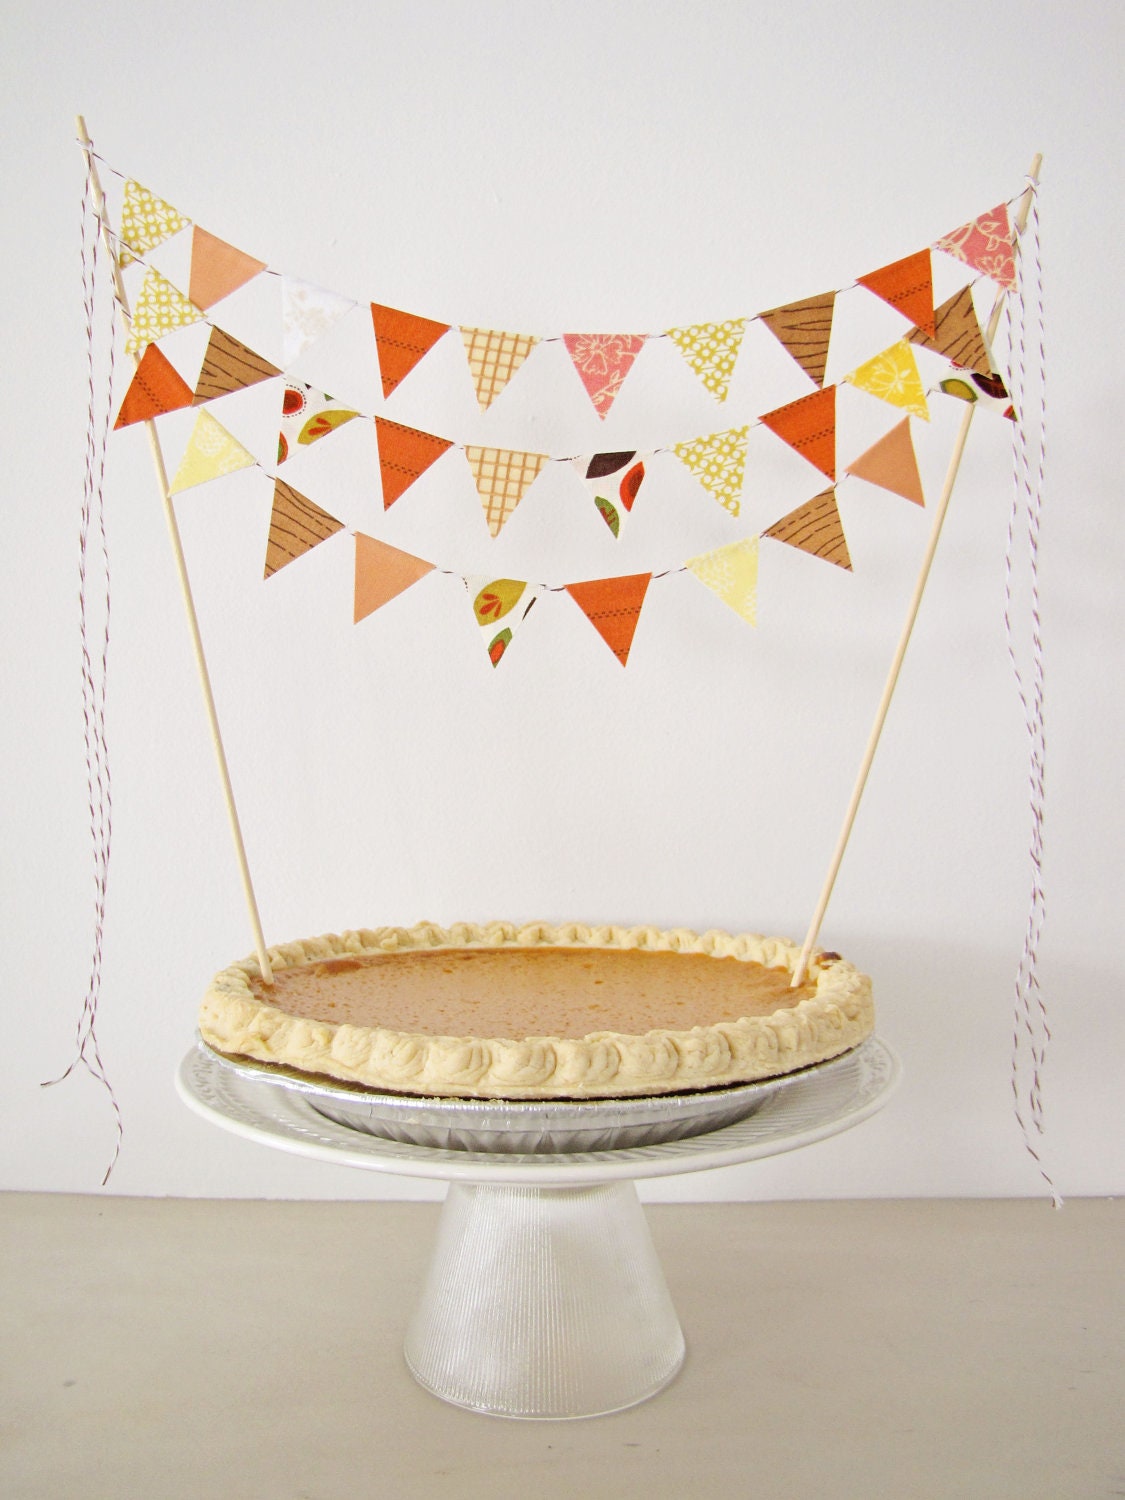 Fabric Cake Bunting Decoration - Cake Topper - Festive Holiday, Thanksgiving, Fall Wedding, Birthday Party, Shower Decor in "Pumpkin Pie"